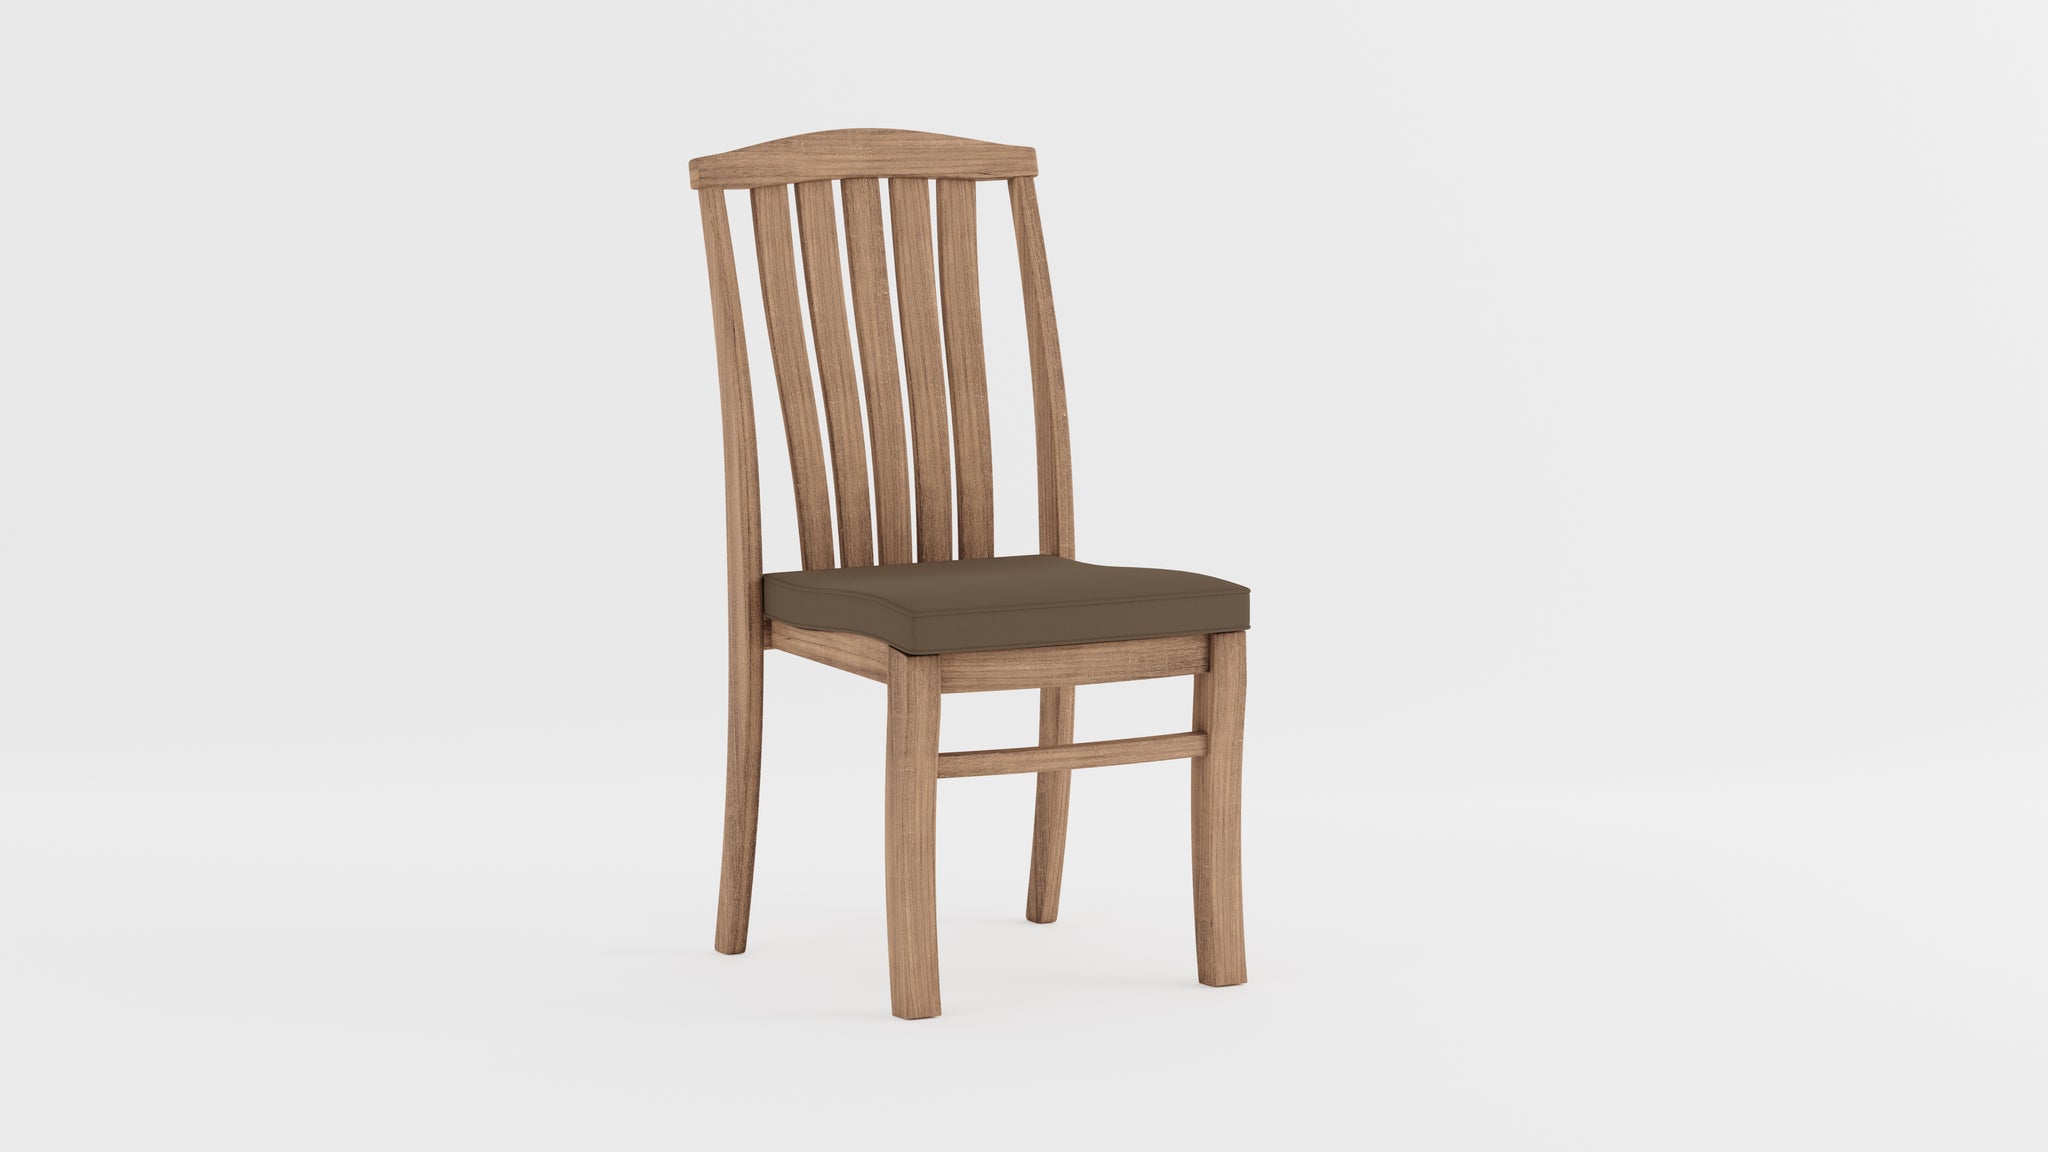 Dorchester Teak Stacking Dining Chair with Taupe Cushion